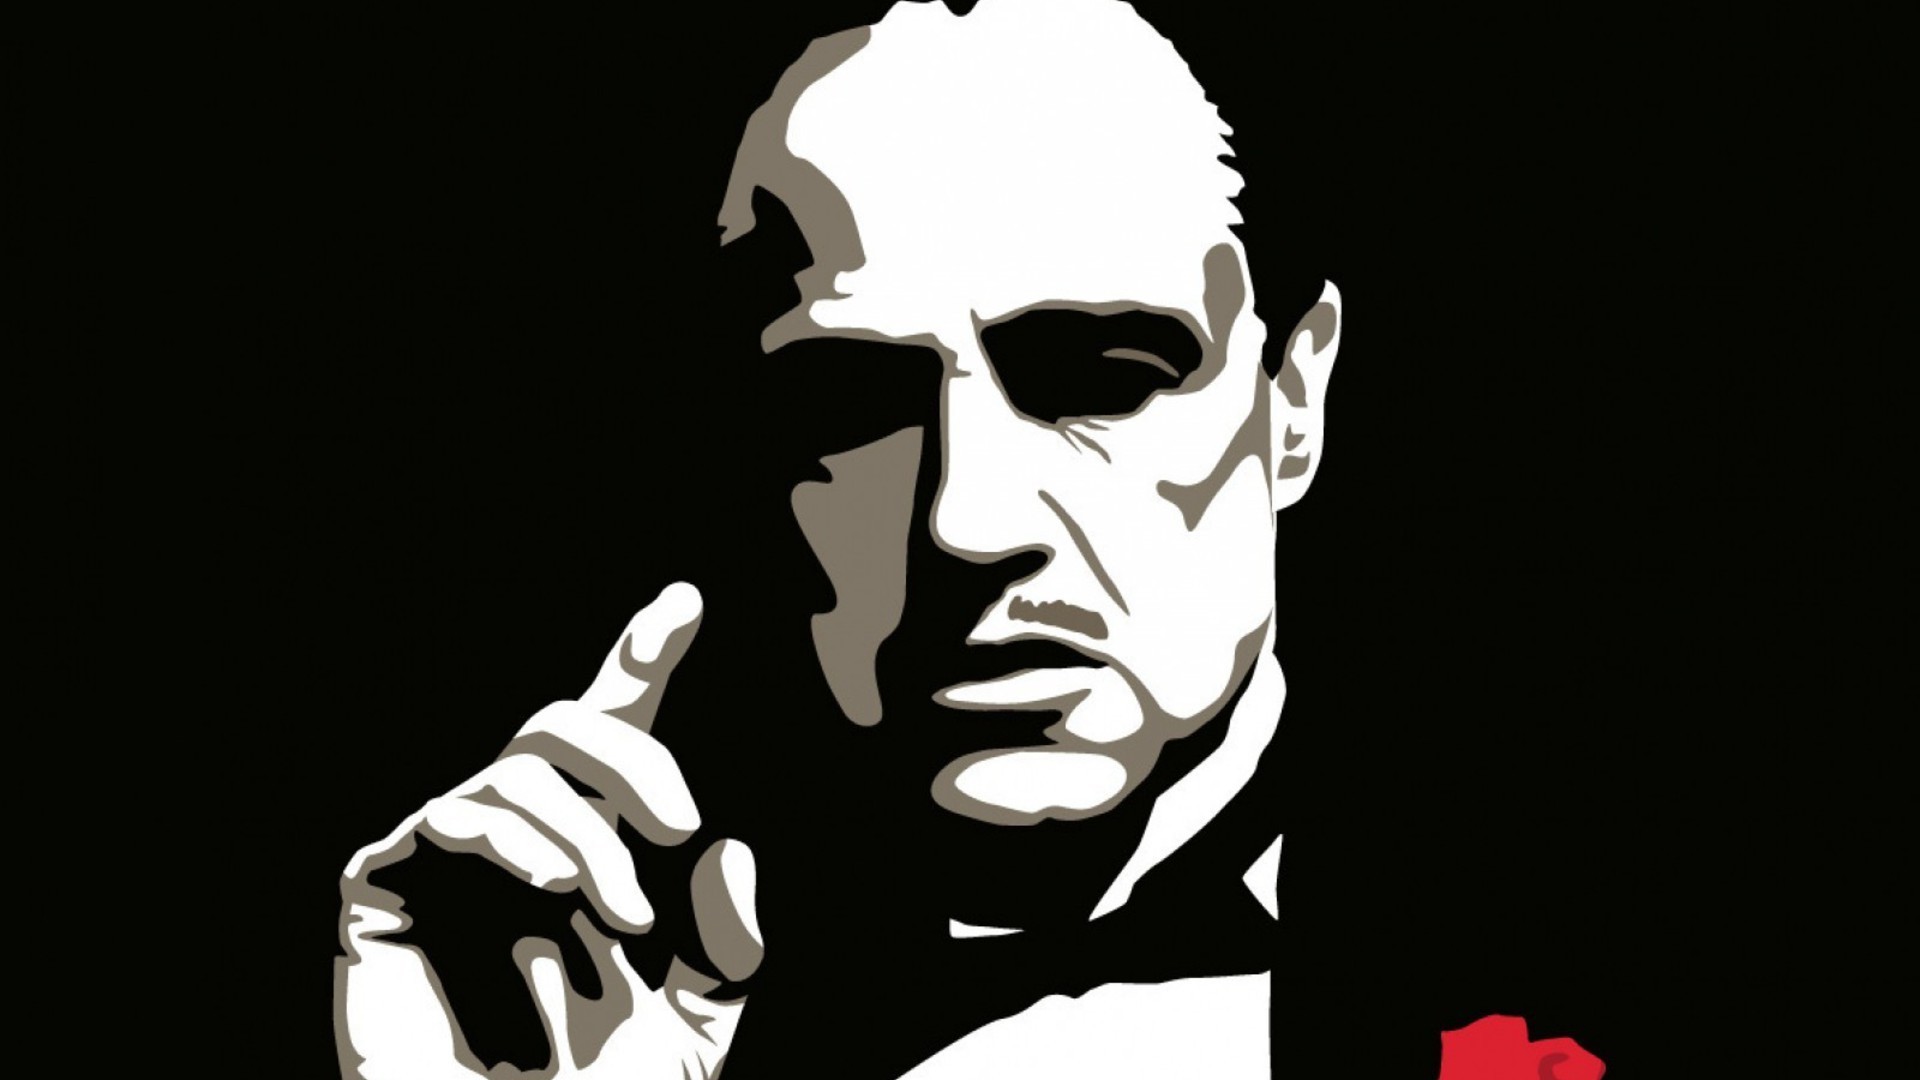 The godfather 3 clasic movie HD phone wallpaper  Peakpx